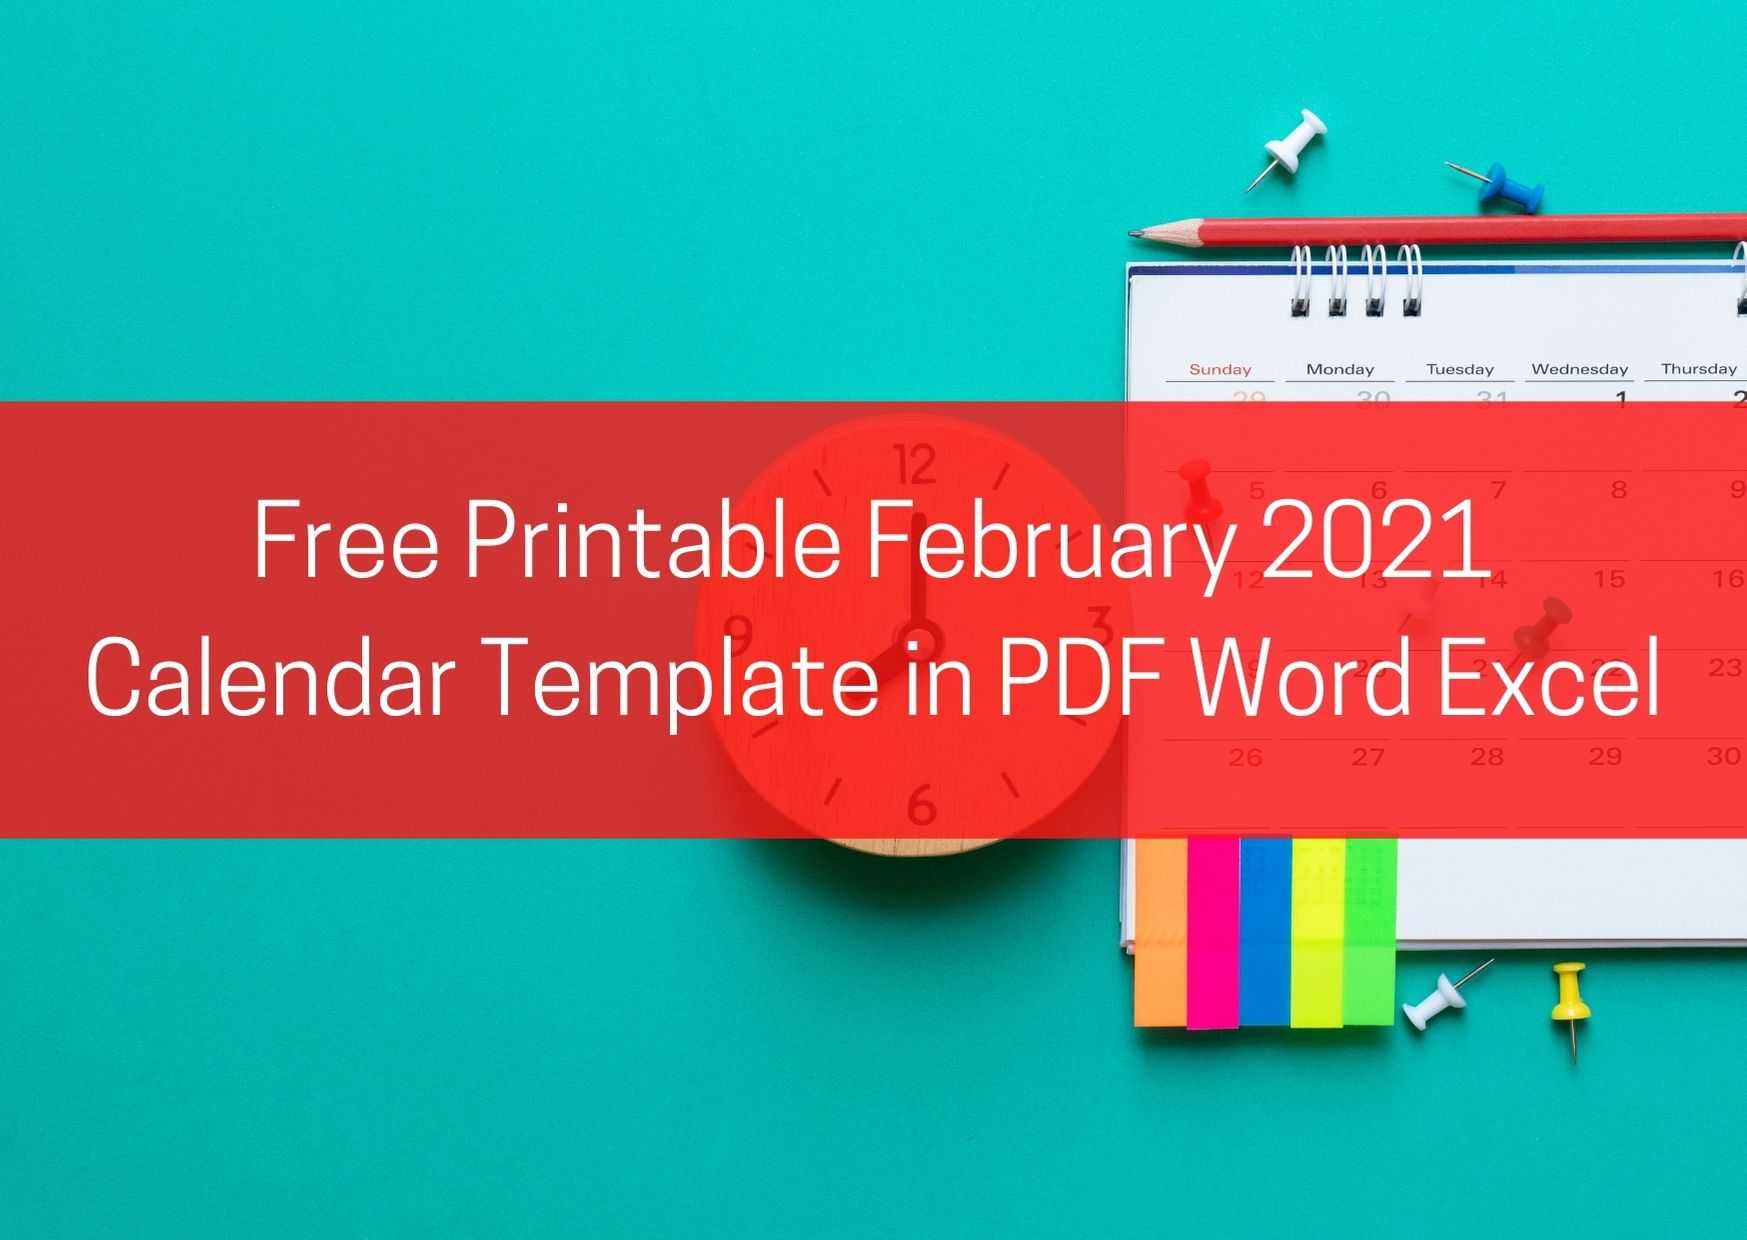 free-printable-february-2021-calendar-template-in-pdf-word-excel